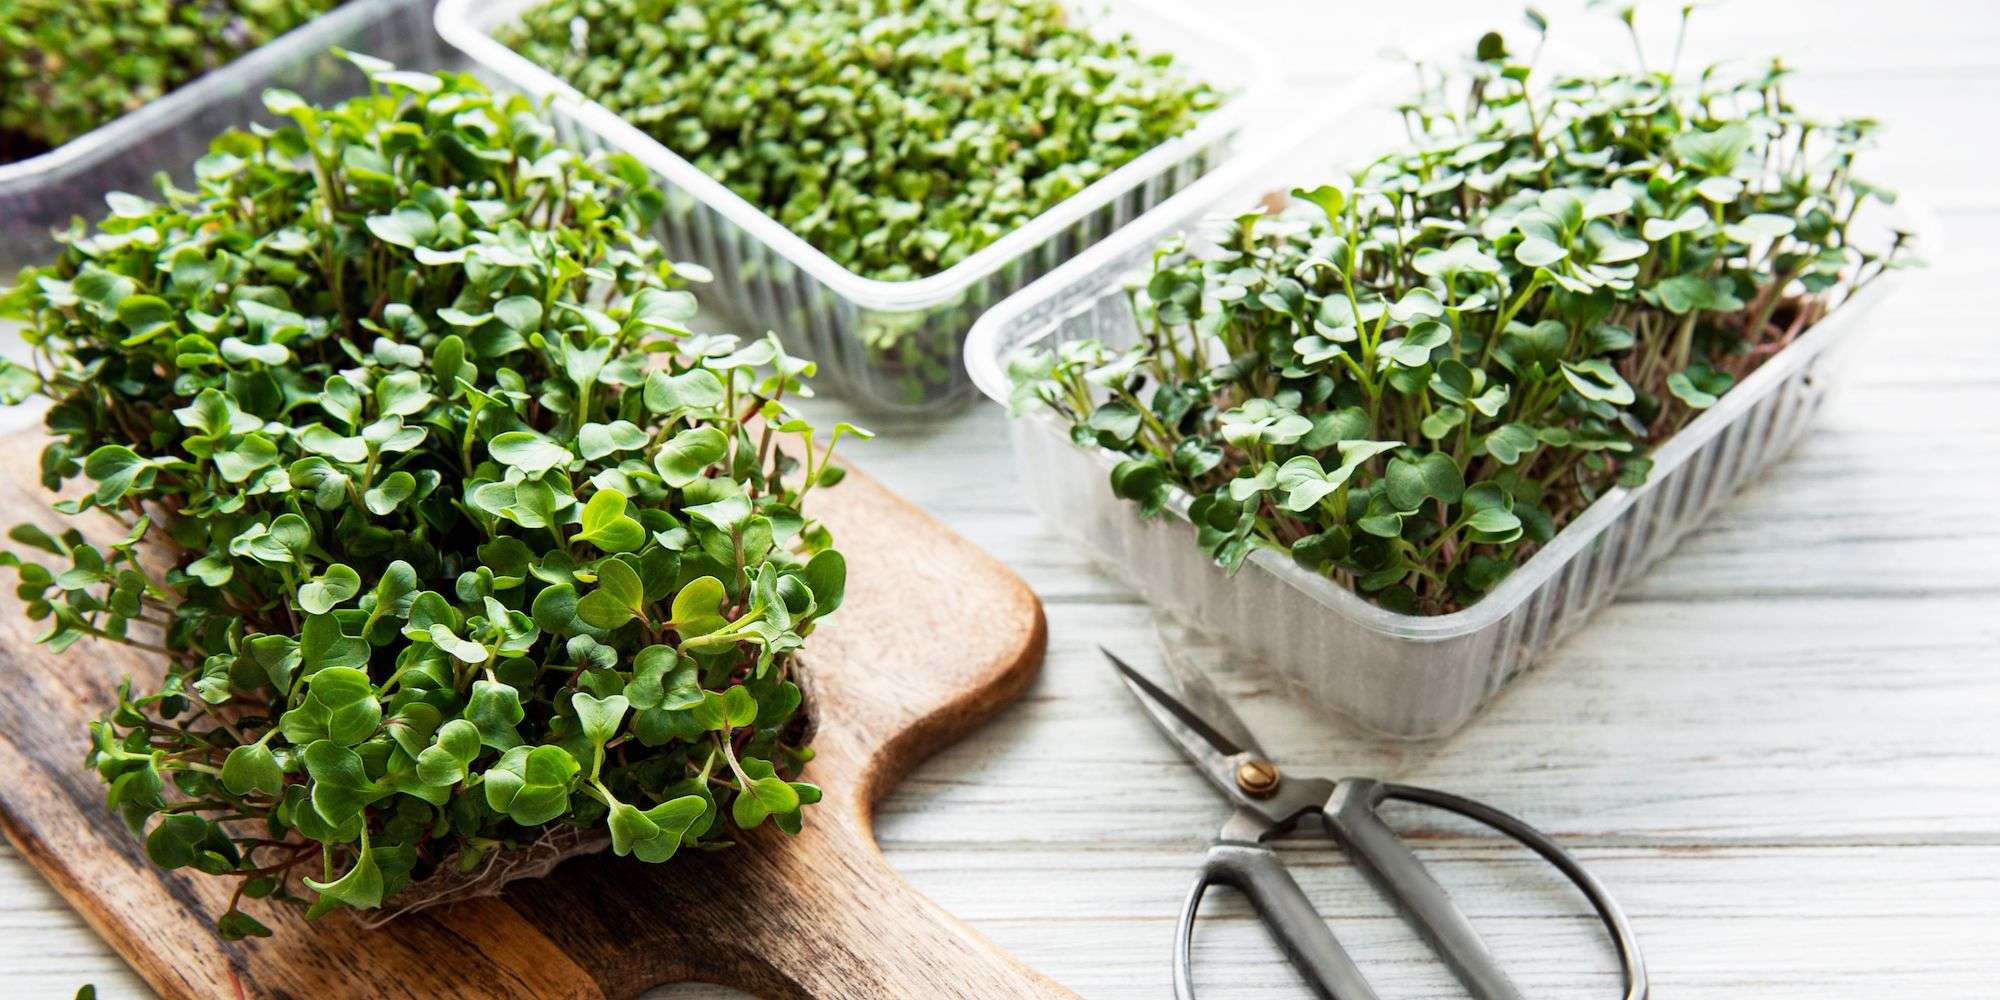 3 containers of microgreens sitting on a kitchen island. A wooden cutting board with small scissors.